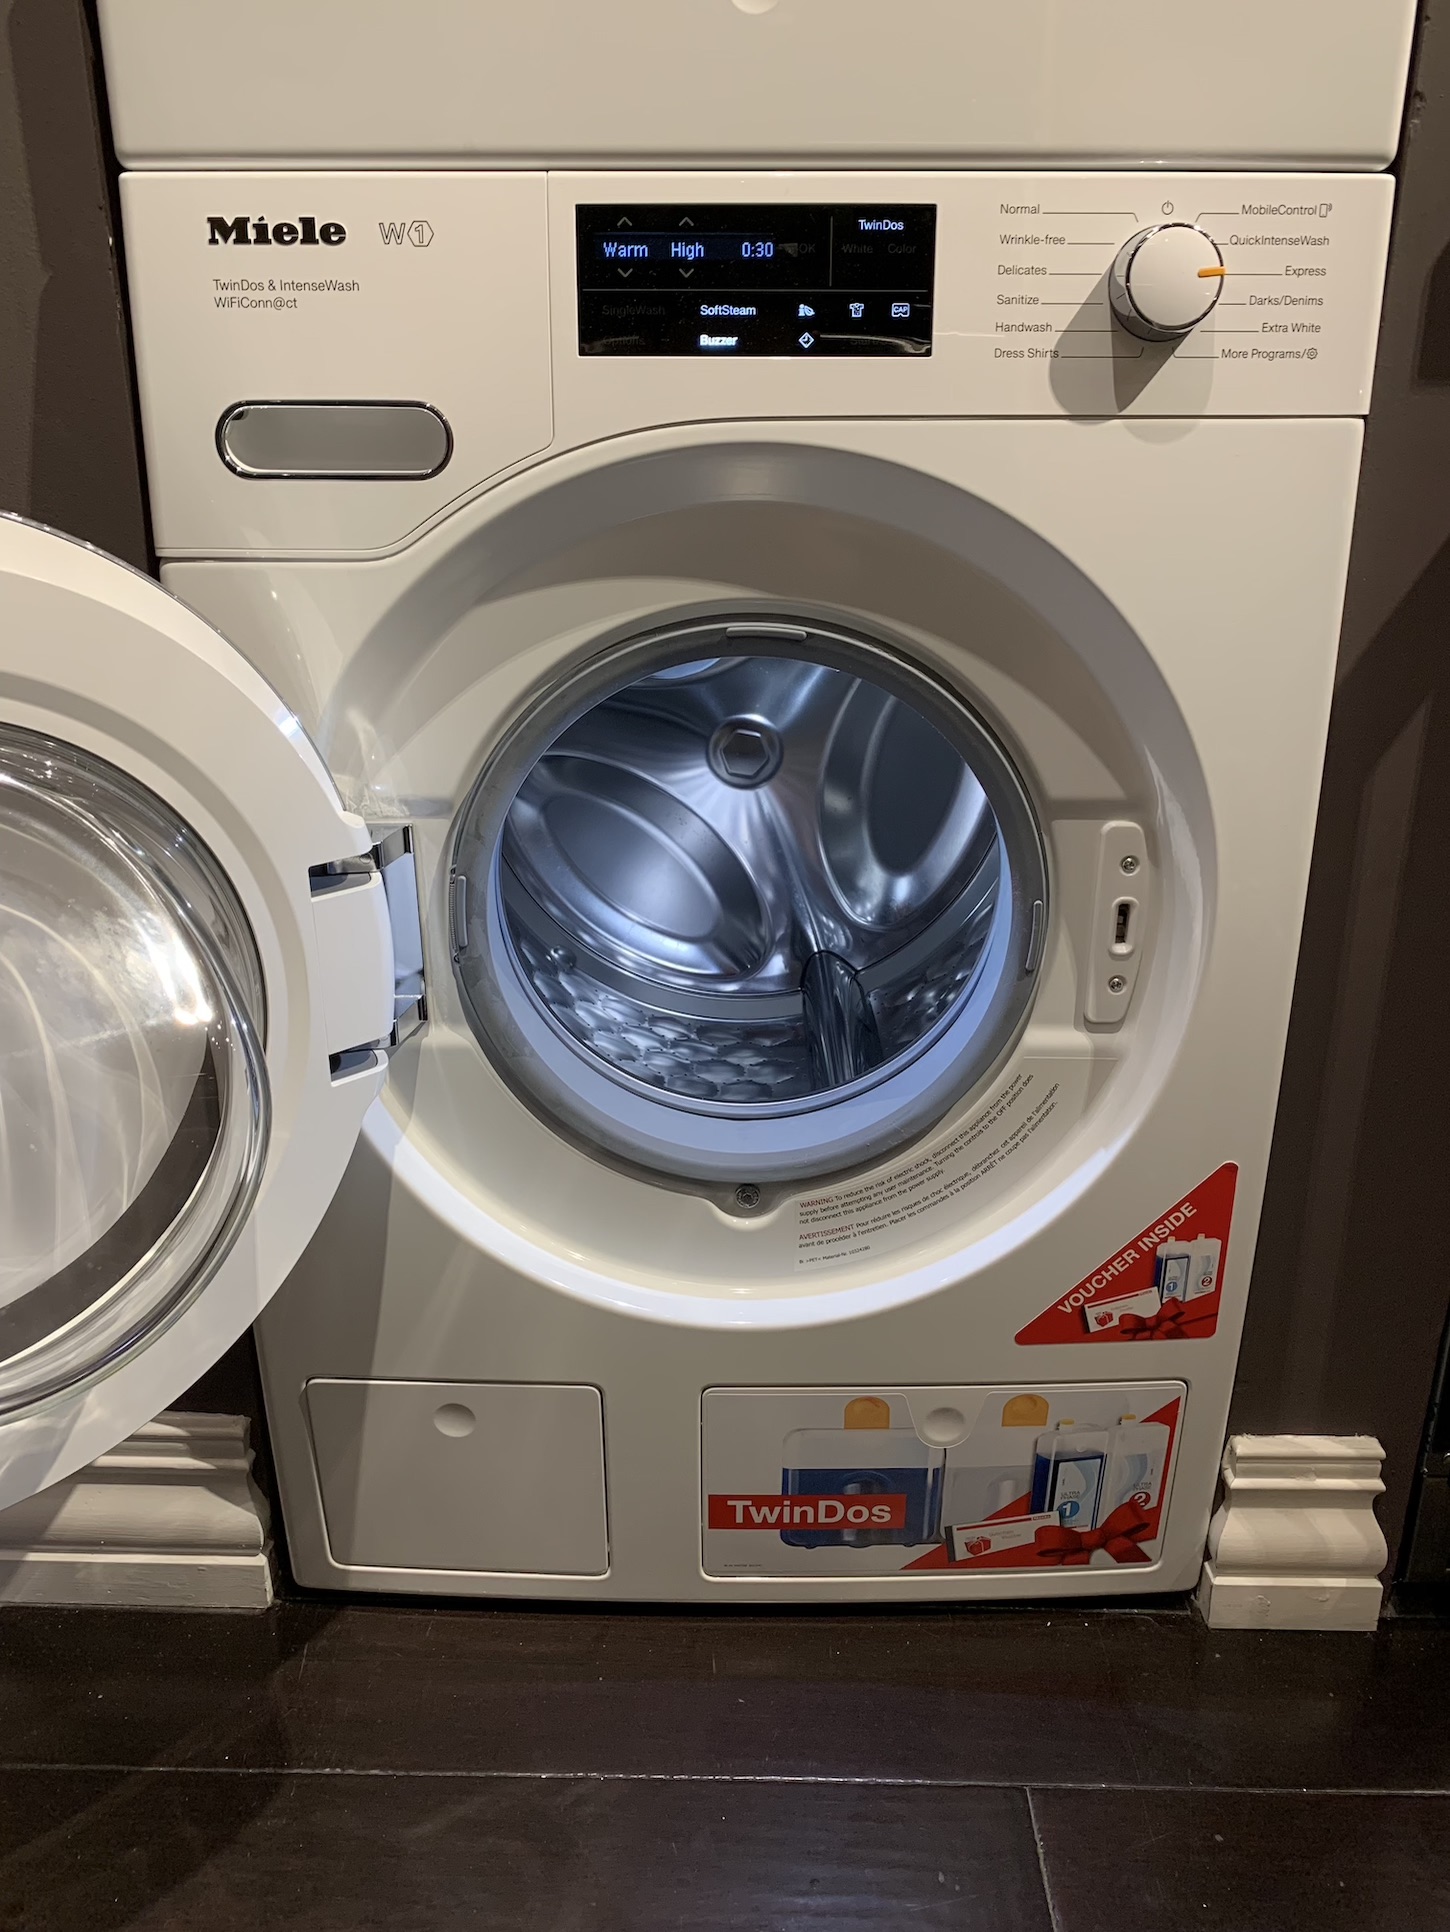 miele-w1-washer-and-t1-dryer-review-rating-wwh860-twi180